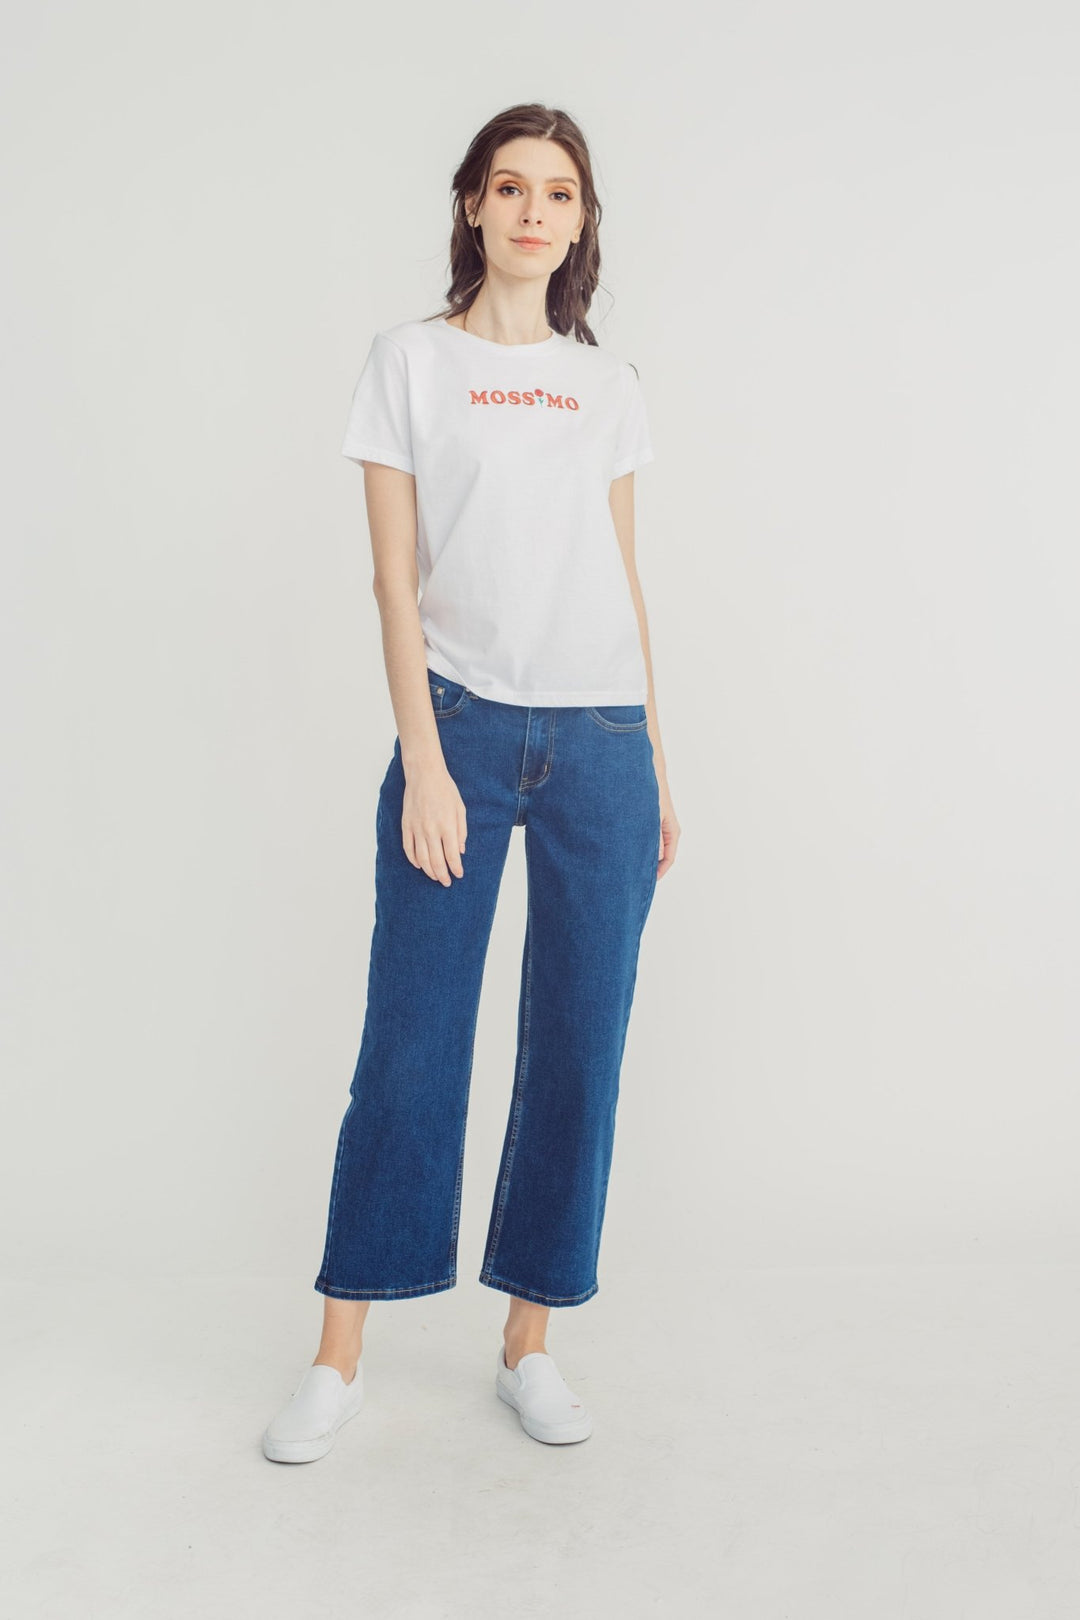 Most Wanted Wide Leg Low Rise Five Pocket Jeans - Mossimo PH